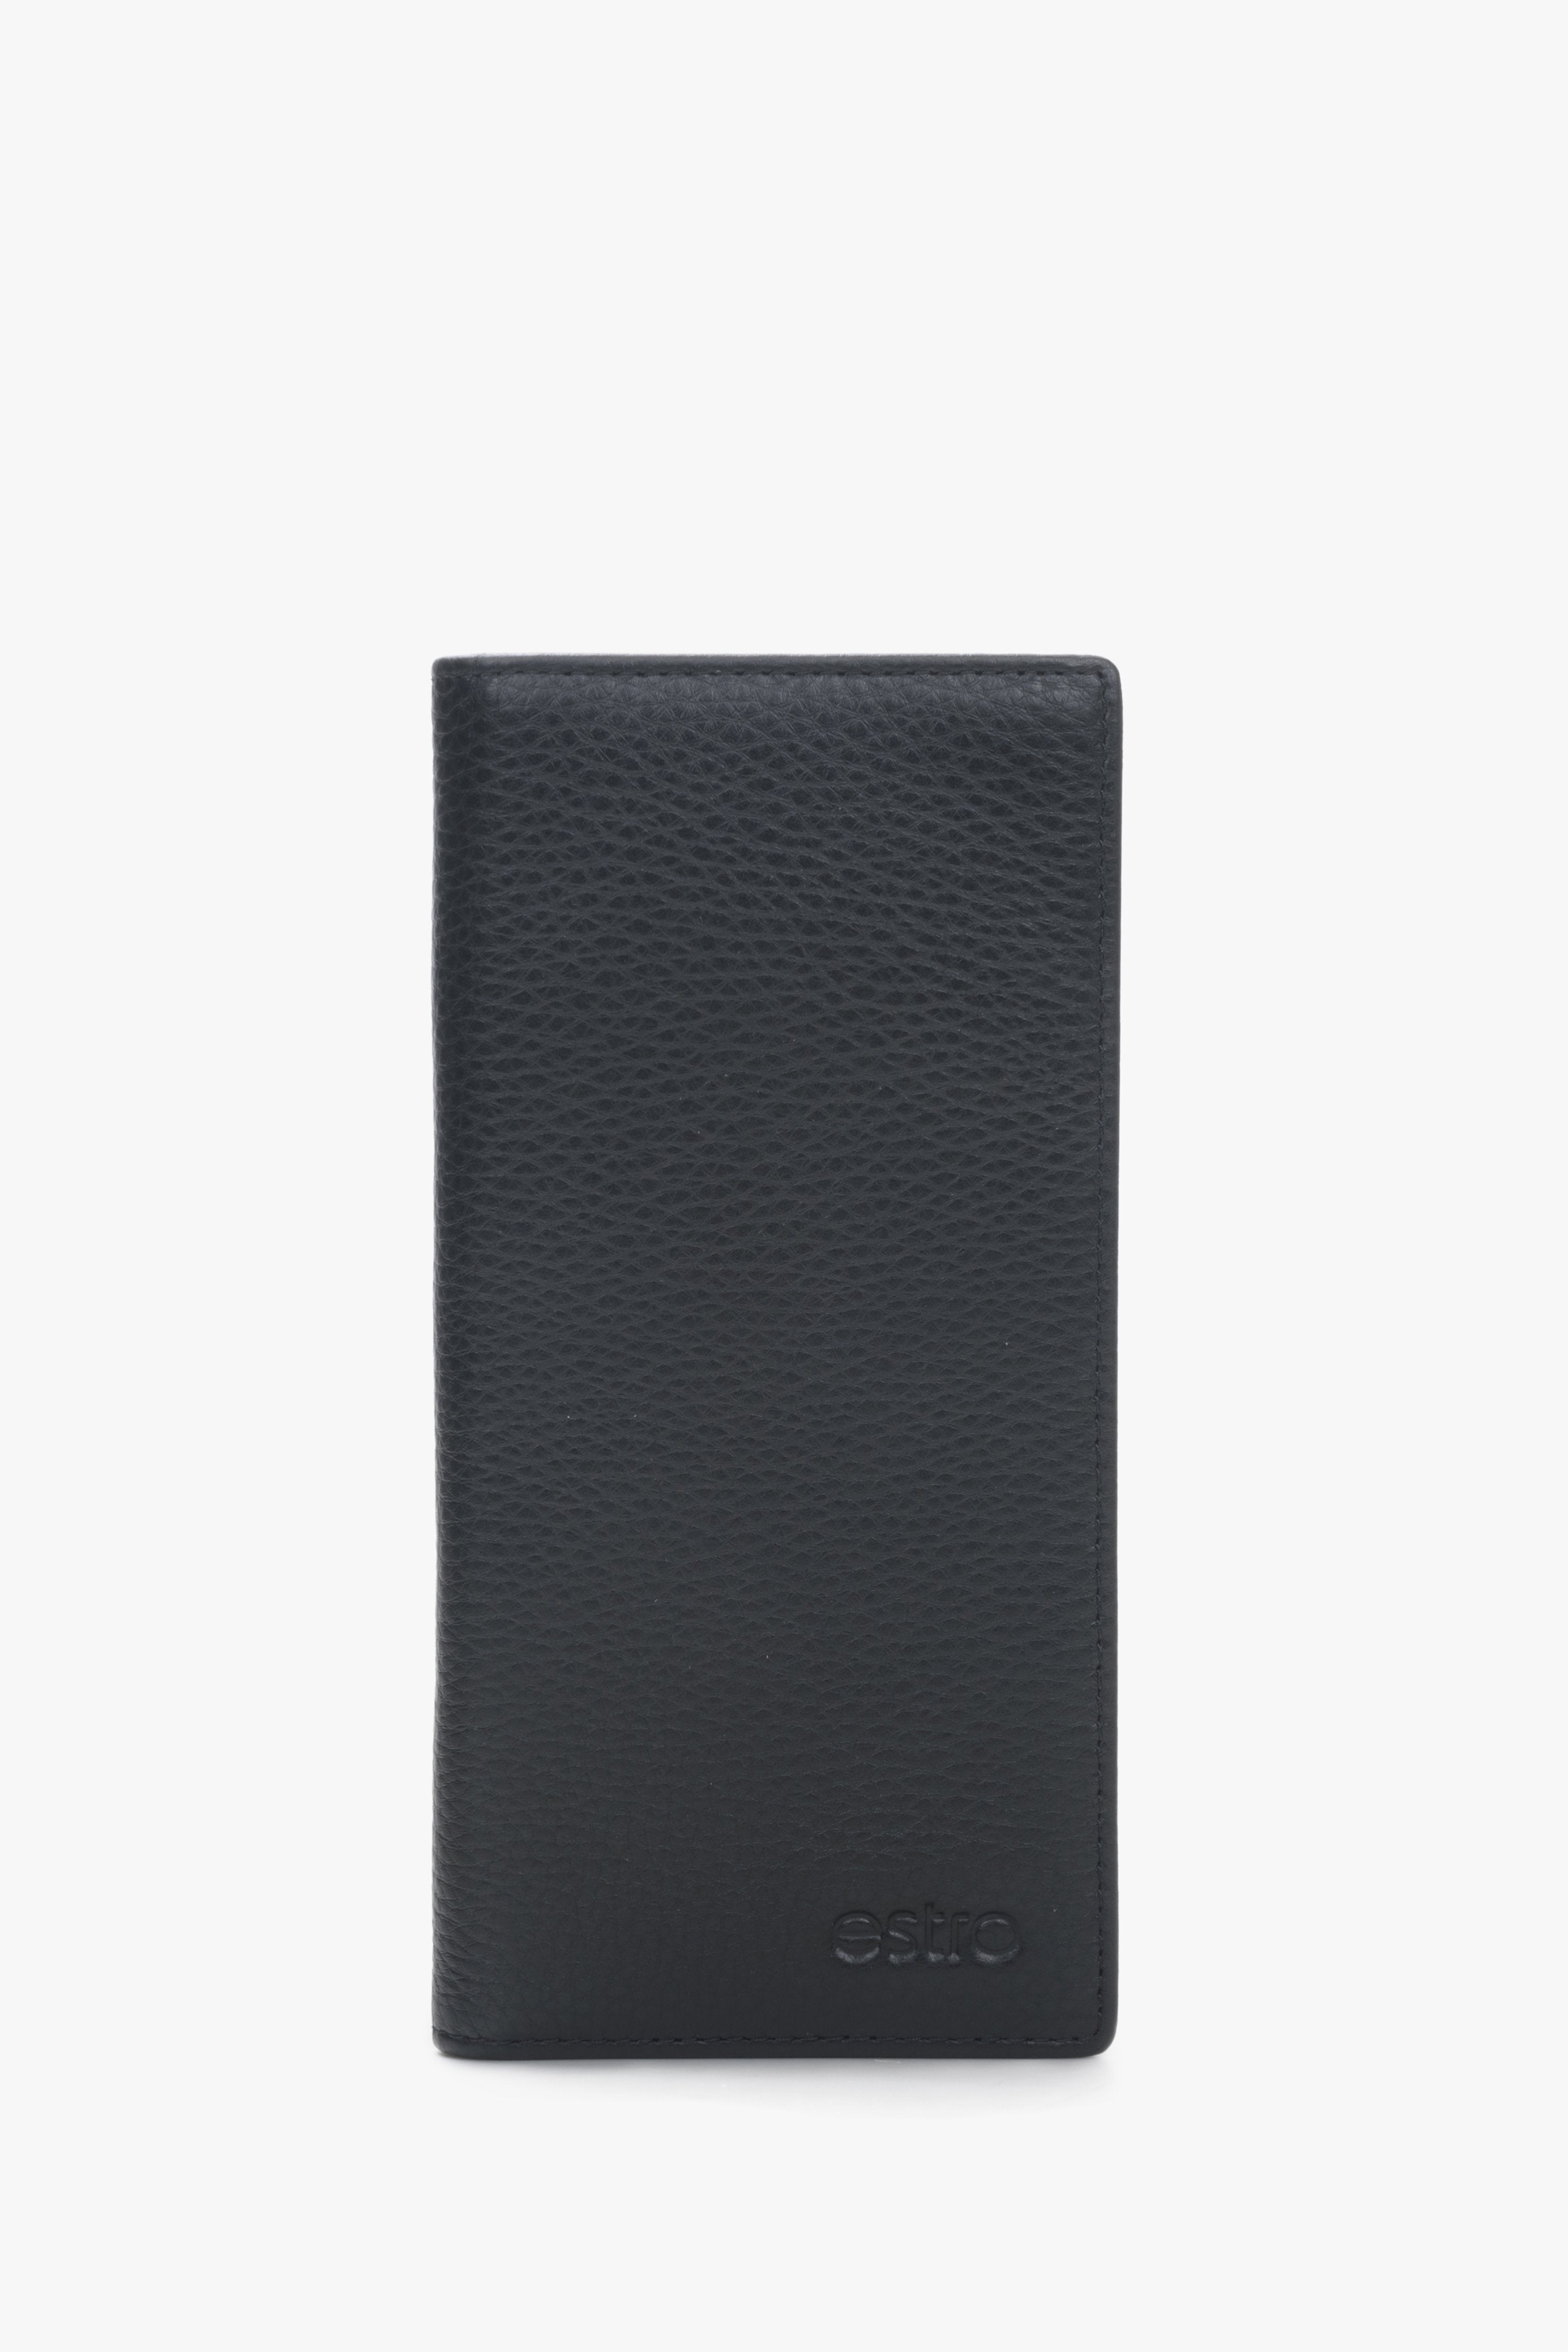 Large men's wallet made of genuine leather - back view of the model.